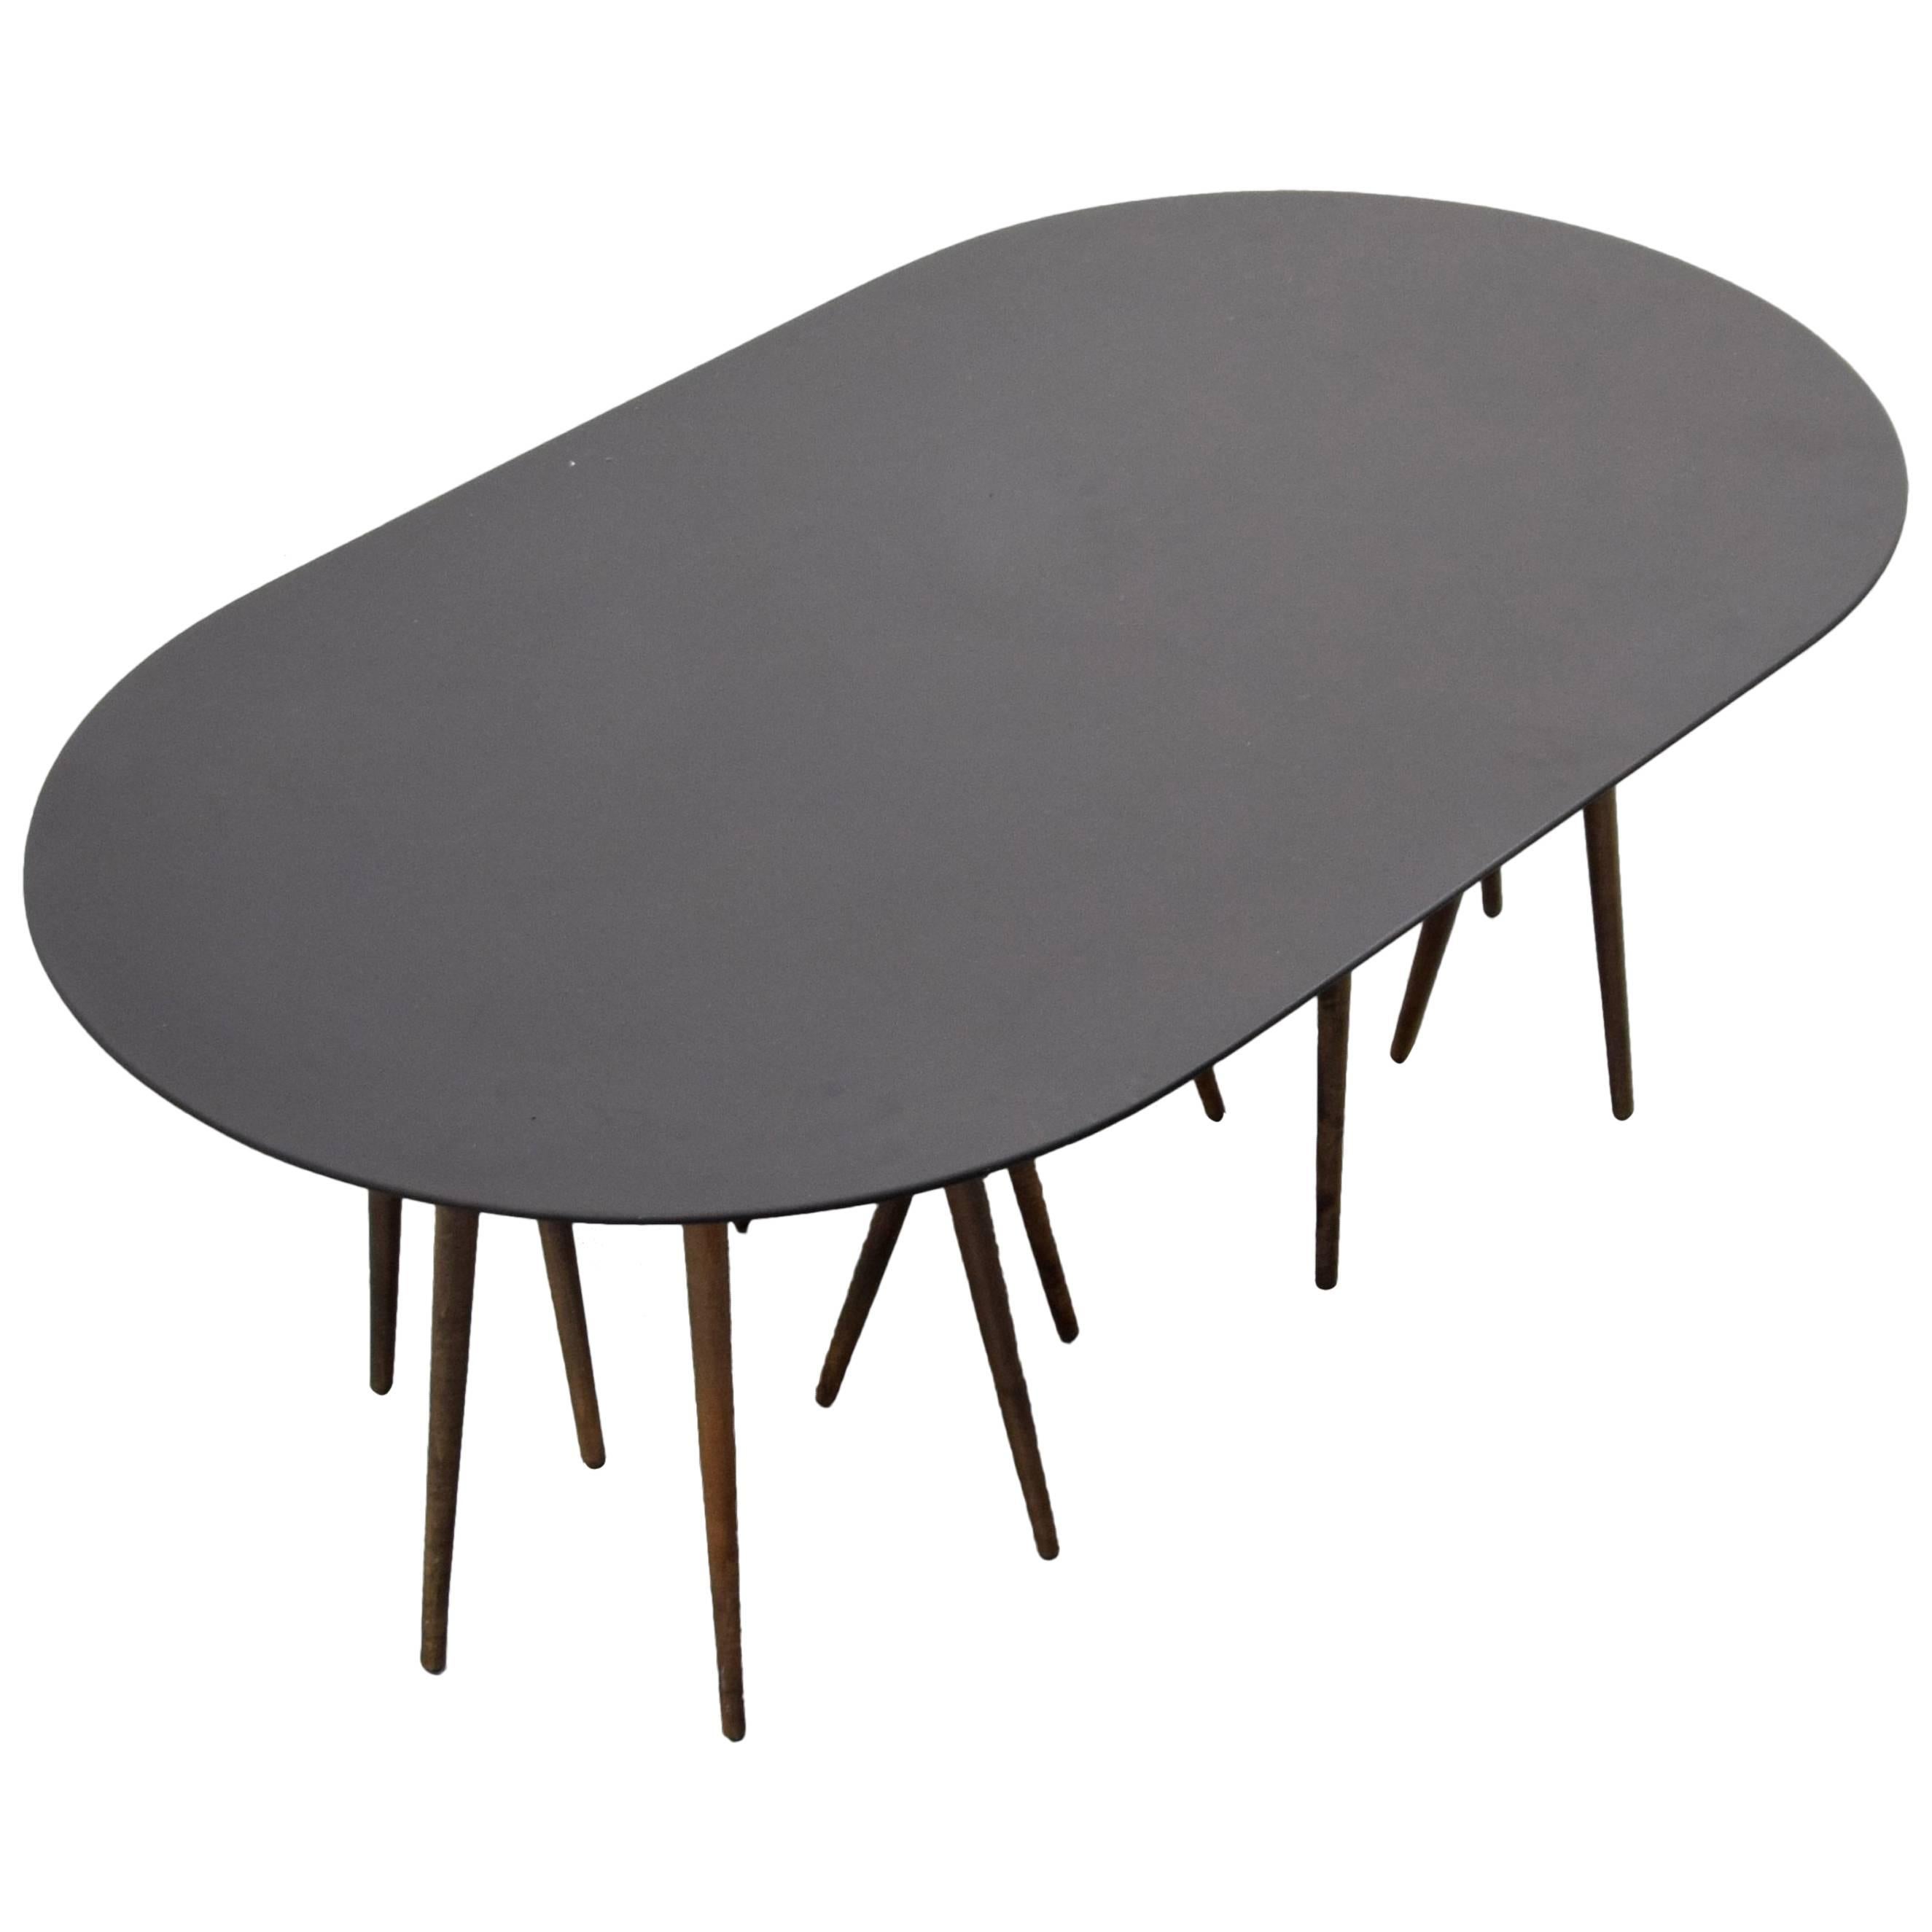 Lawrence Laske "Toothpick Cactus" Coffee Table, Stone Top